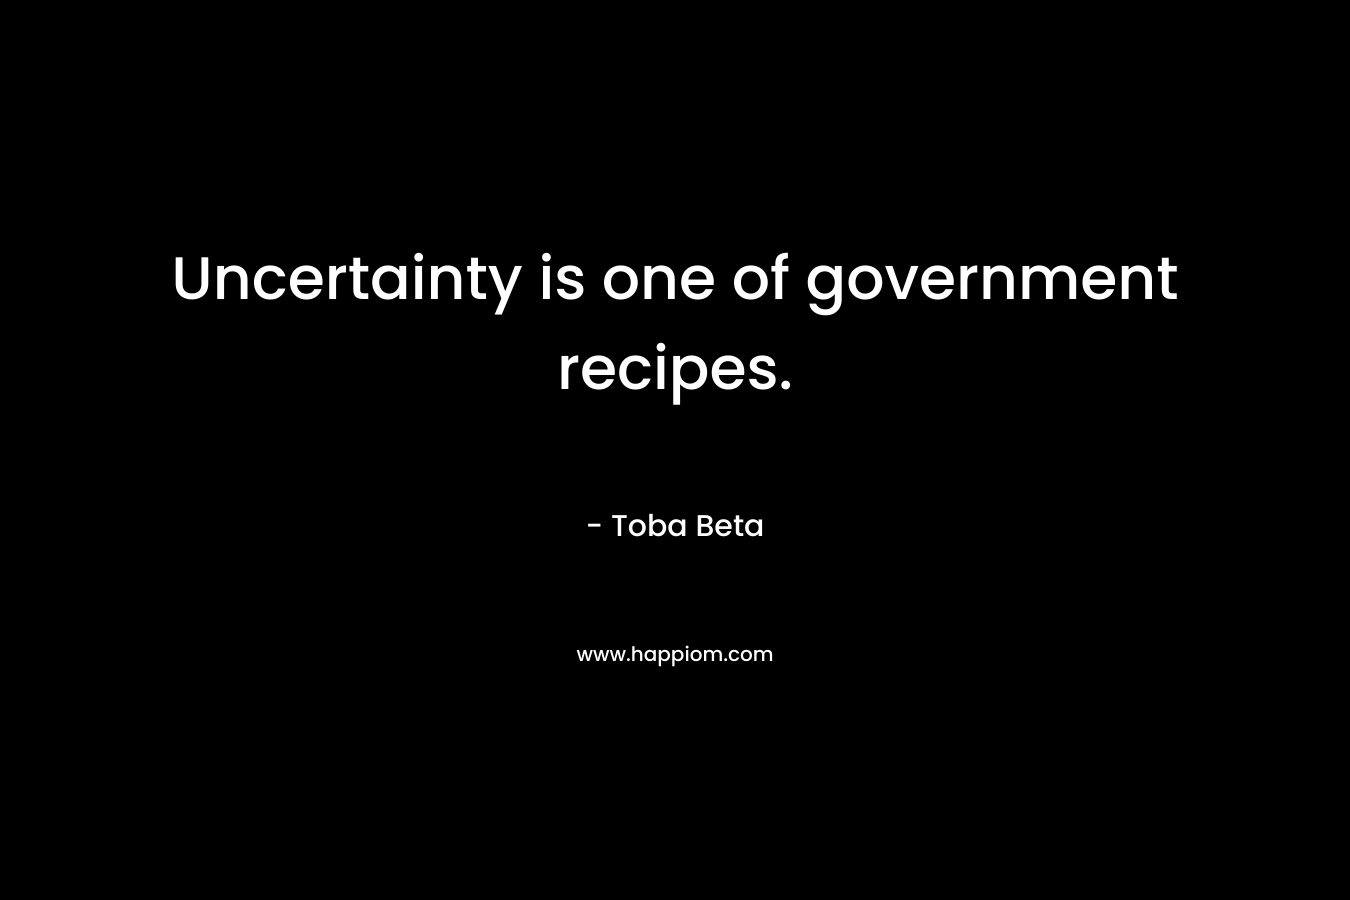 Uncertainty is one of government recipes.